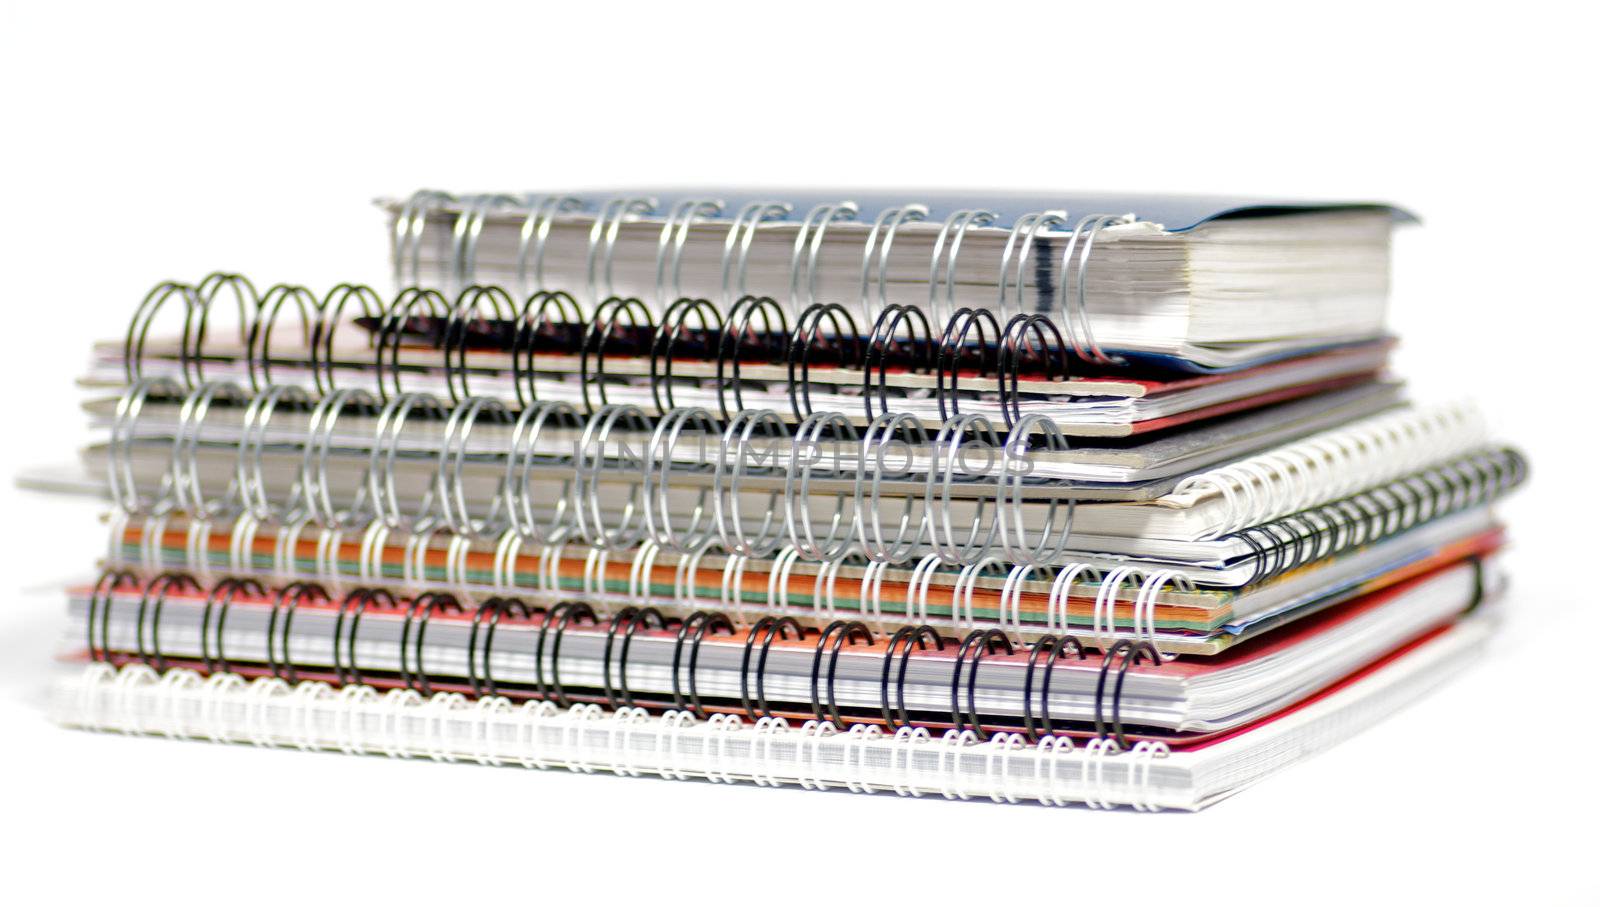 Multi colored Spiral notepads by zhekos